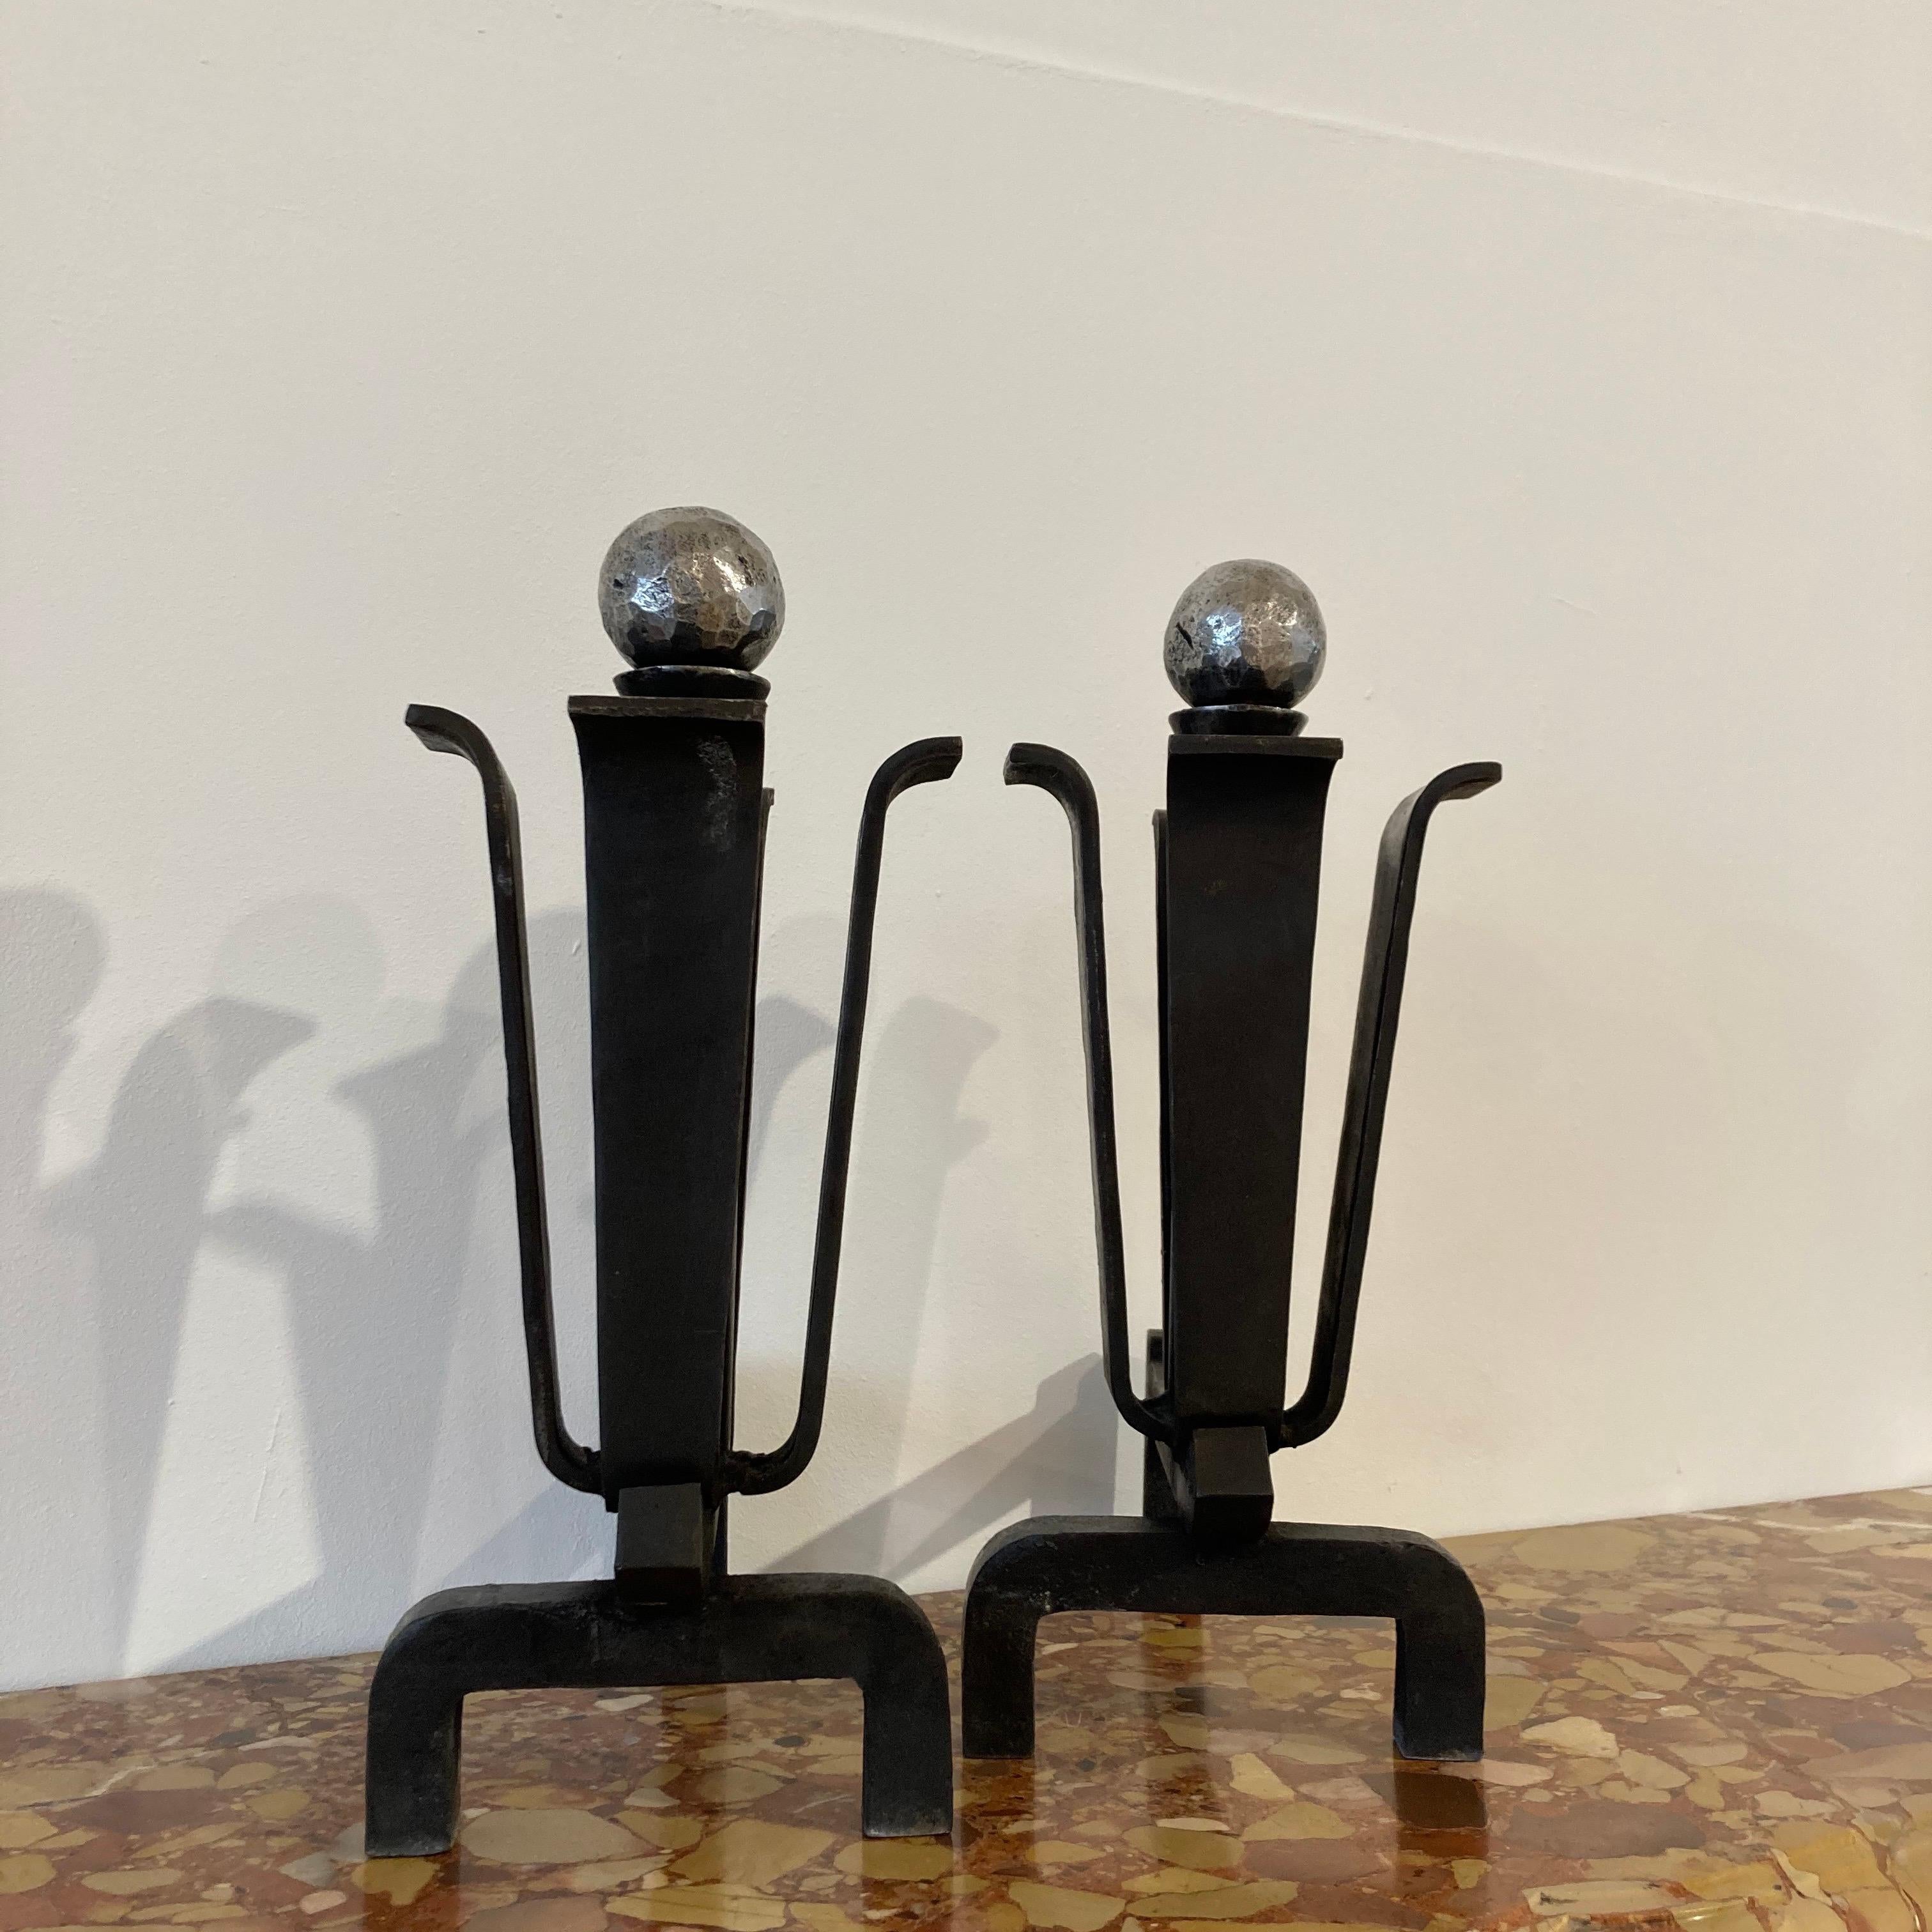 European Stylish Pair of Mid-Century Modern Andirons or Firebogs For Sale